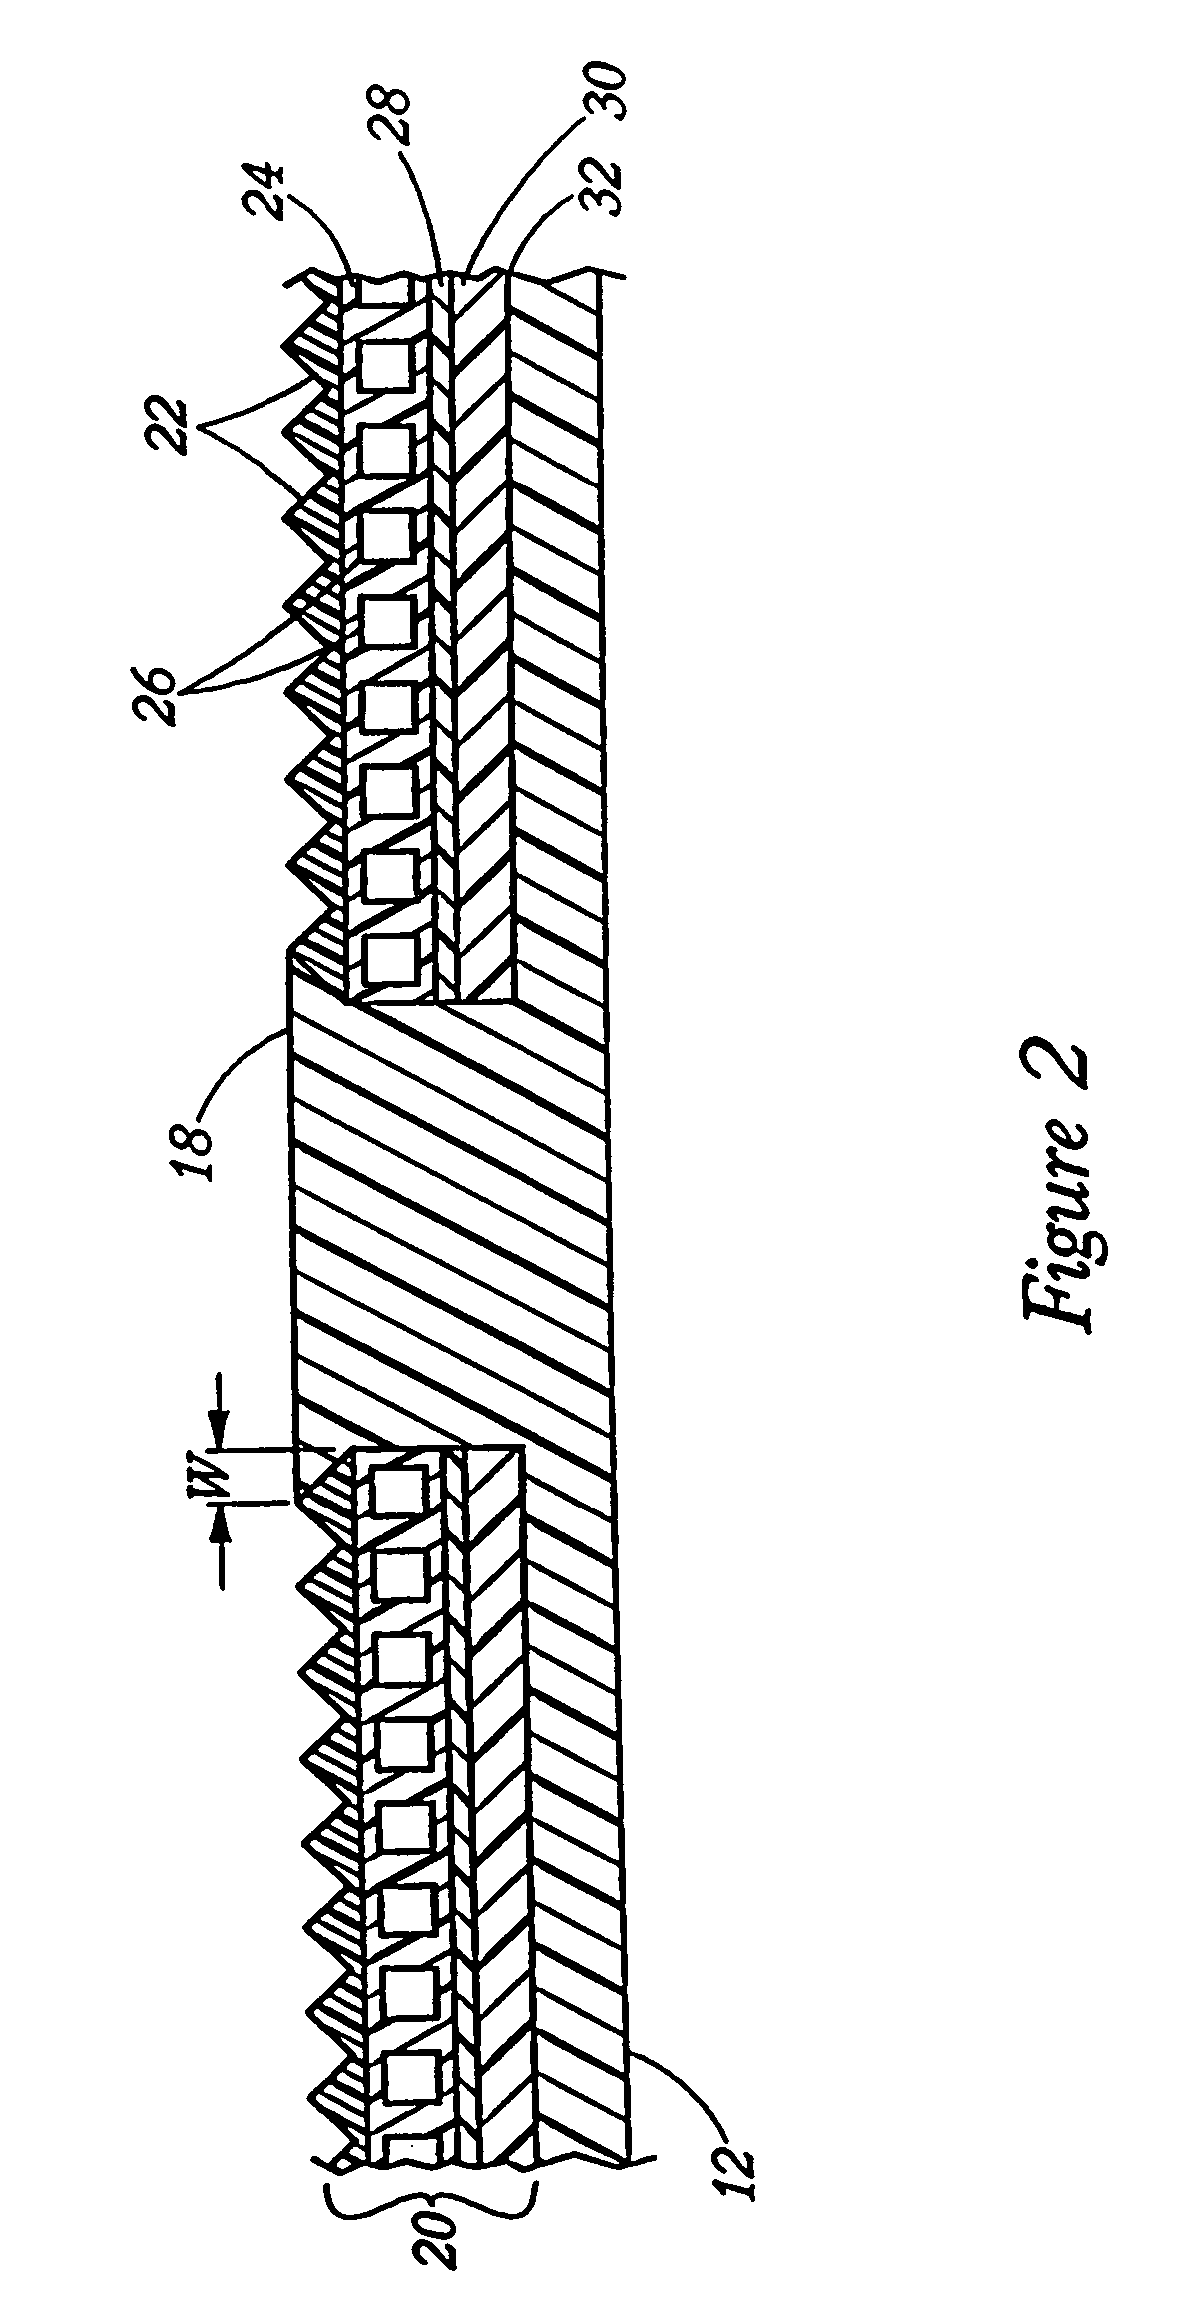 Method of bonding a lenticular lens sheet to plastic objects and objects made from same